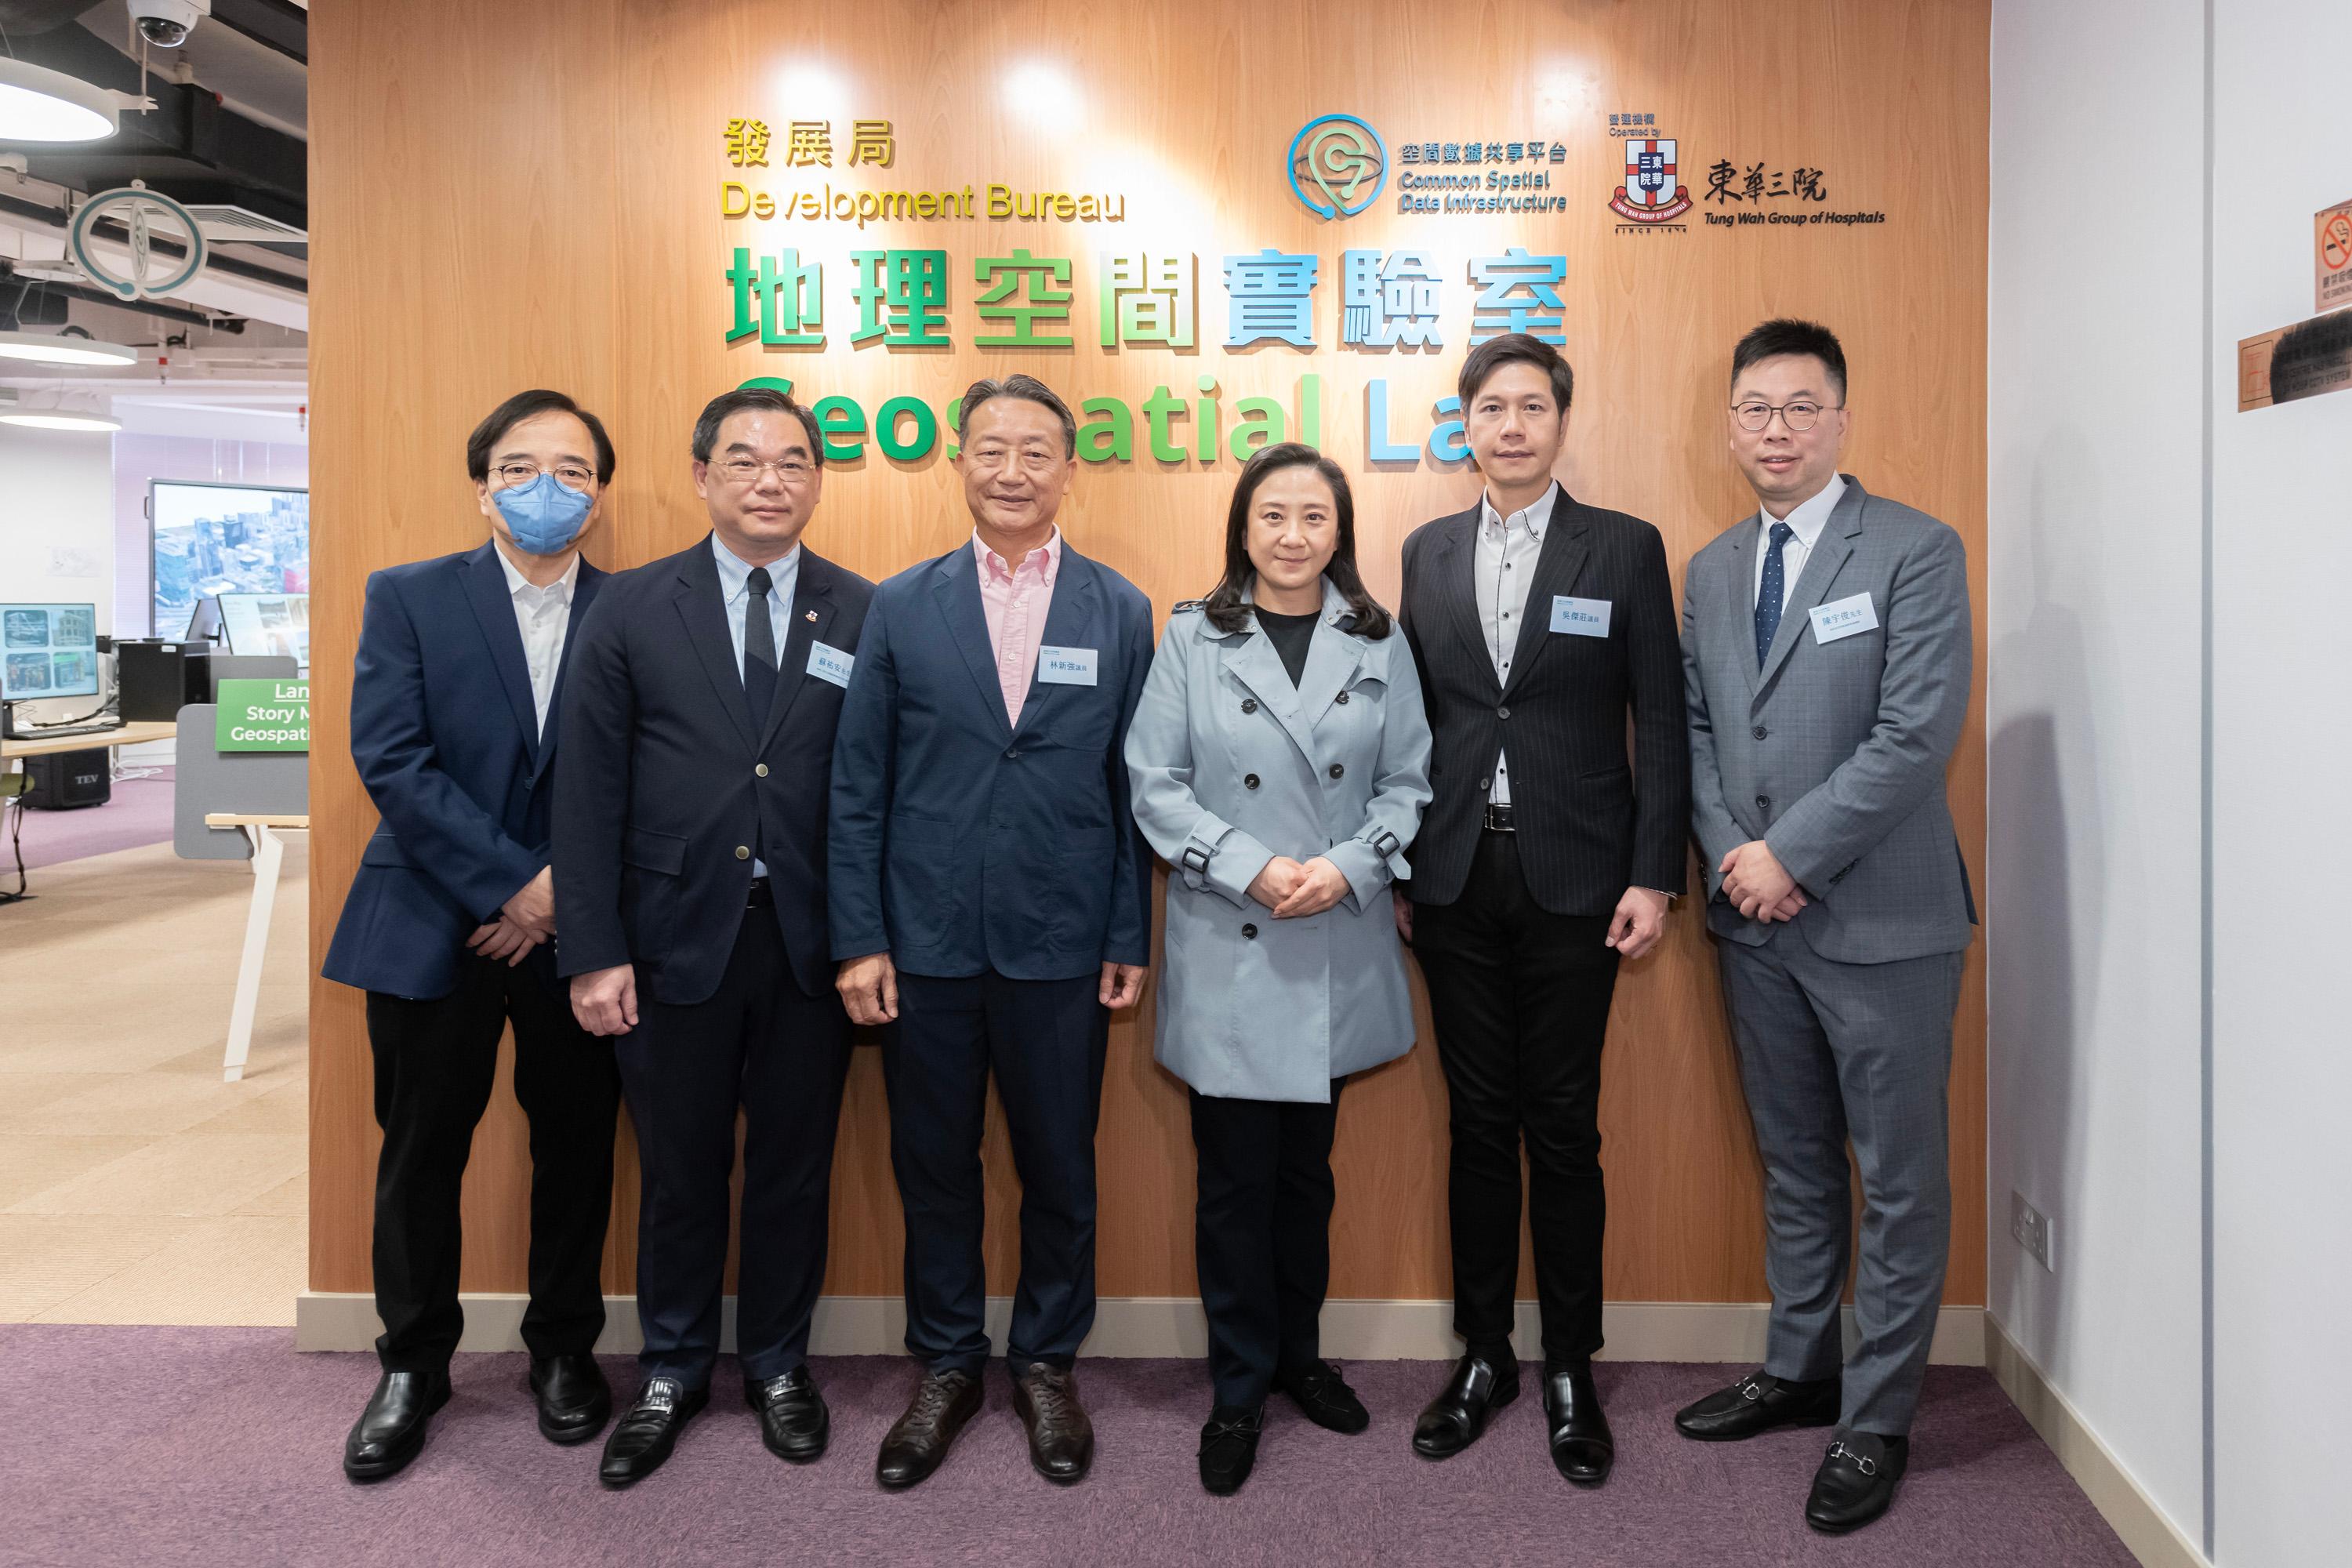 The Legislative Council (LegCo) Subcommittee on Matters Relating to the Development of Smart City visited the Geospatial Lab (GeoLab) today (May 9). Photo shows LegCo Members posing for a group photo with representatives of the GeoLab.